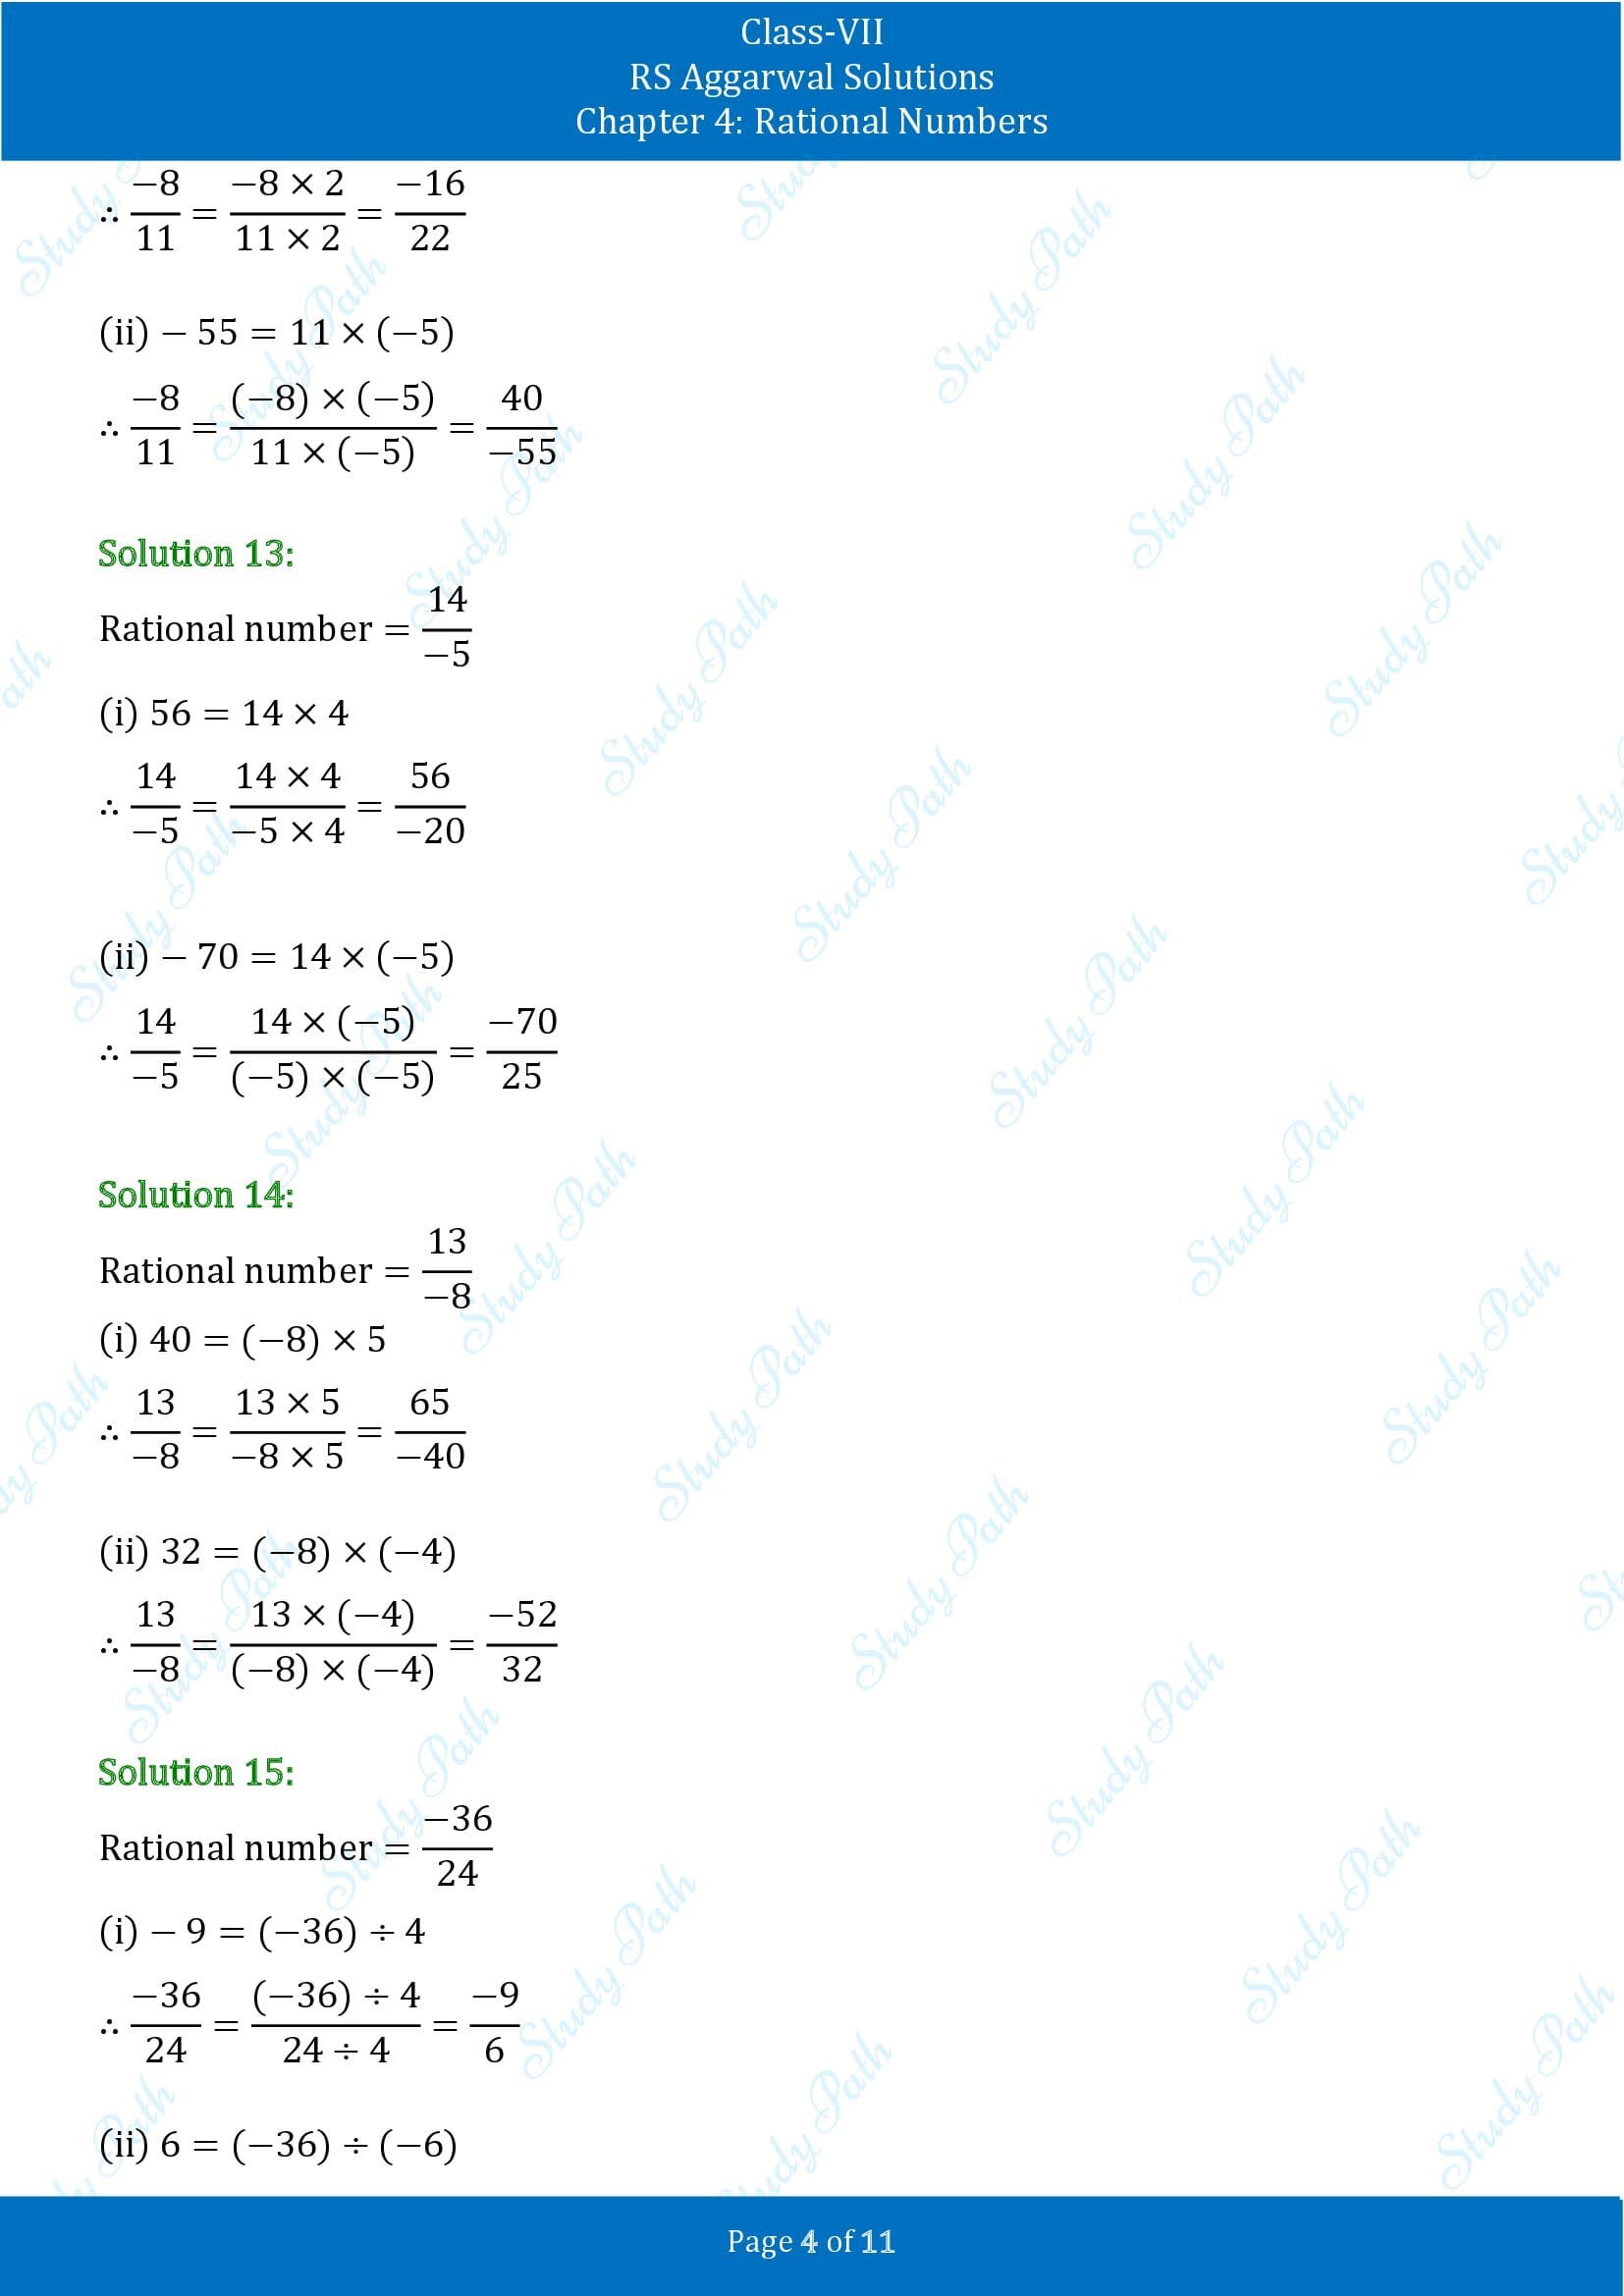 RS Aggarwal Solutions Class 7 Chapter 4 Rational Numbers Exercise 4A 00004